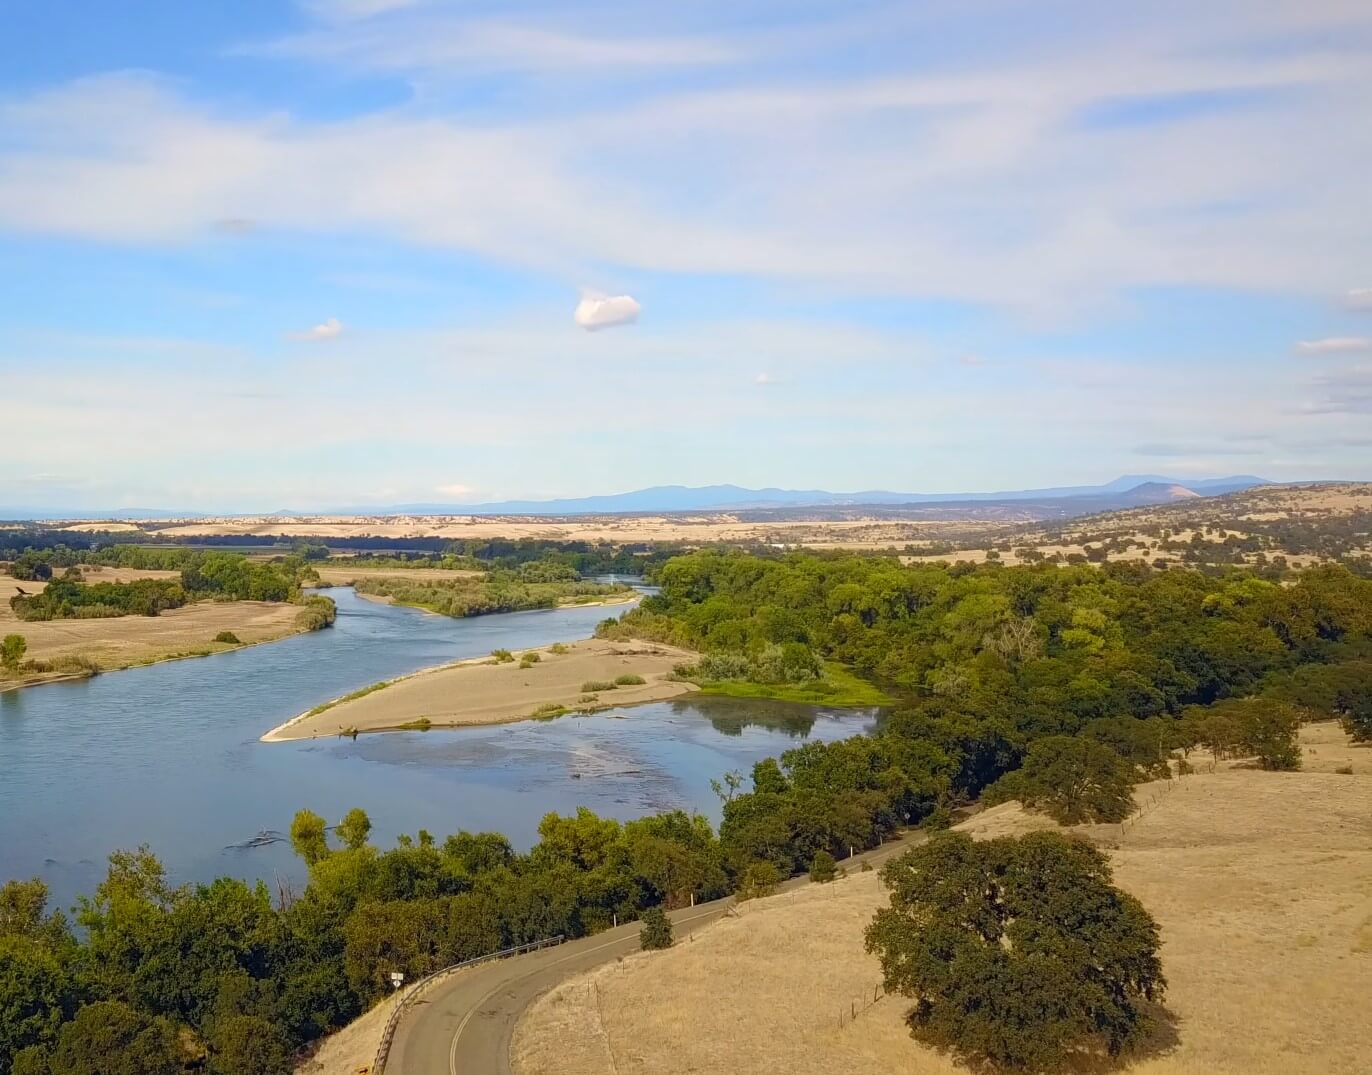 Drone footage of Tehama County